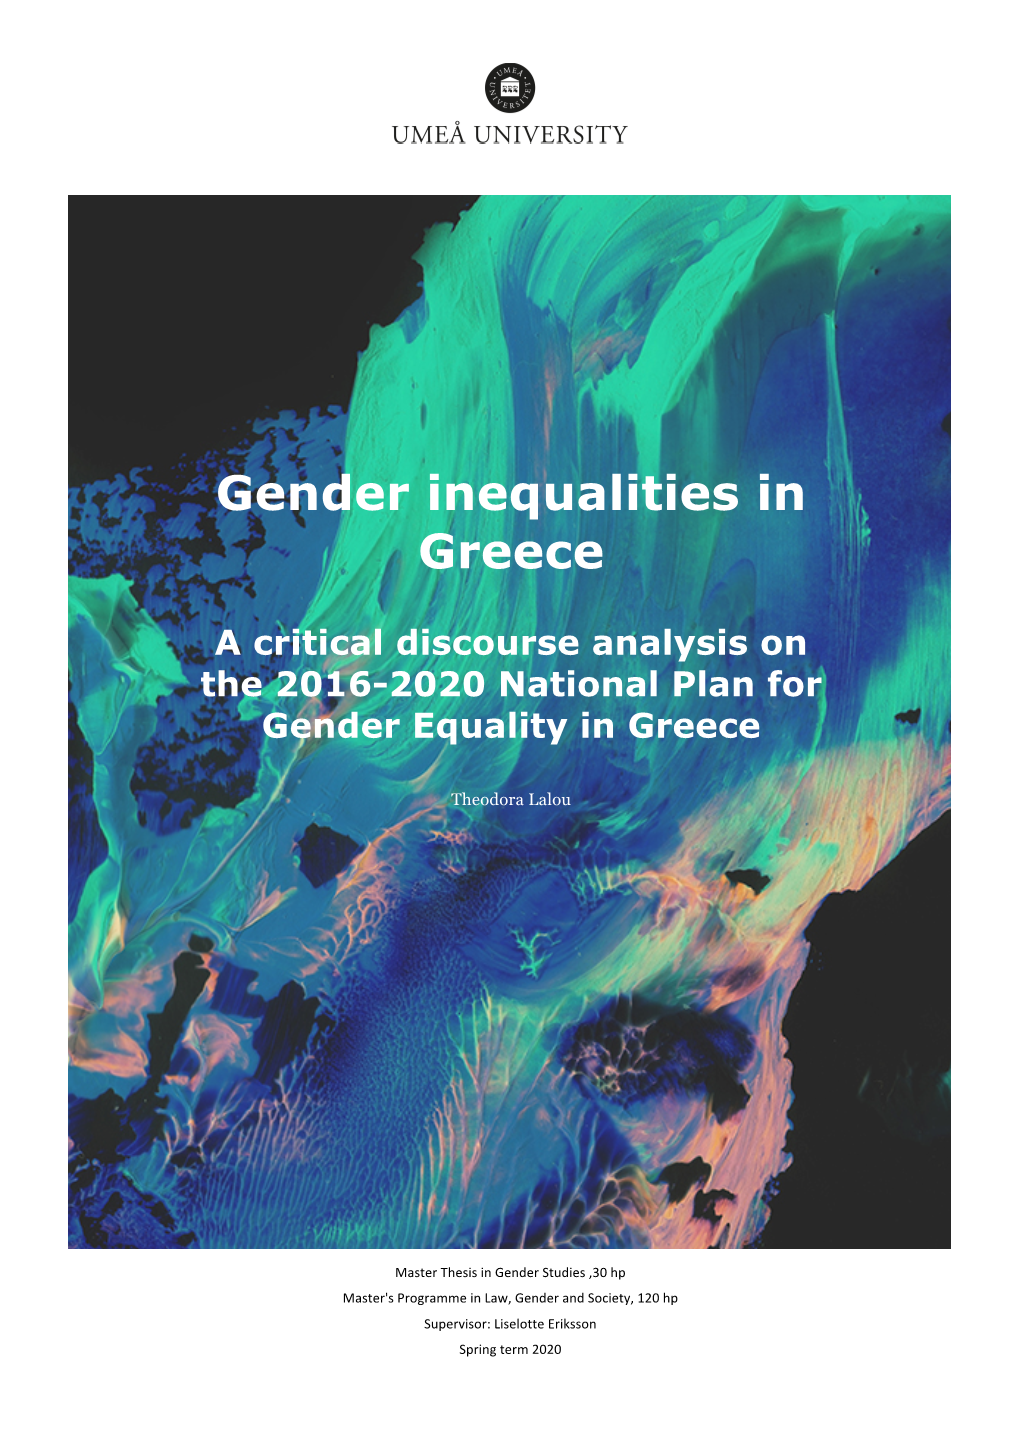 A Critical Discourse Analysis on the 2016-2020 National Plan for Gender Equality in Greece